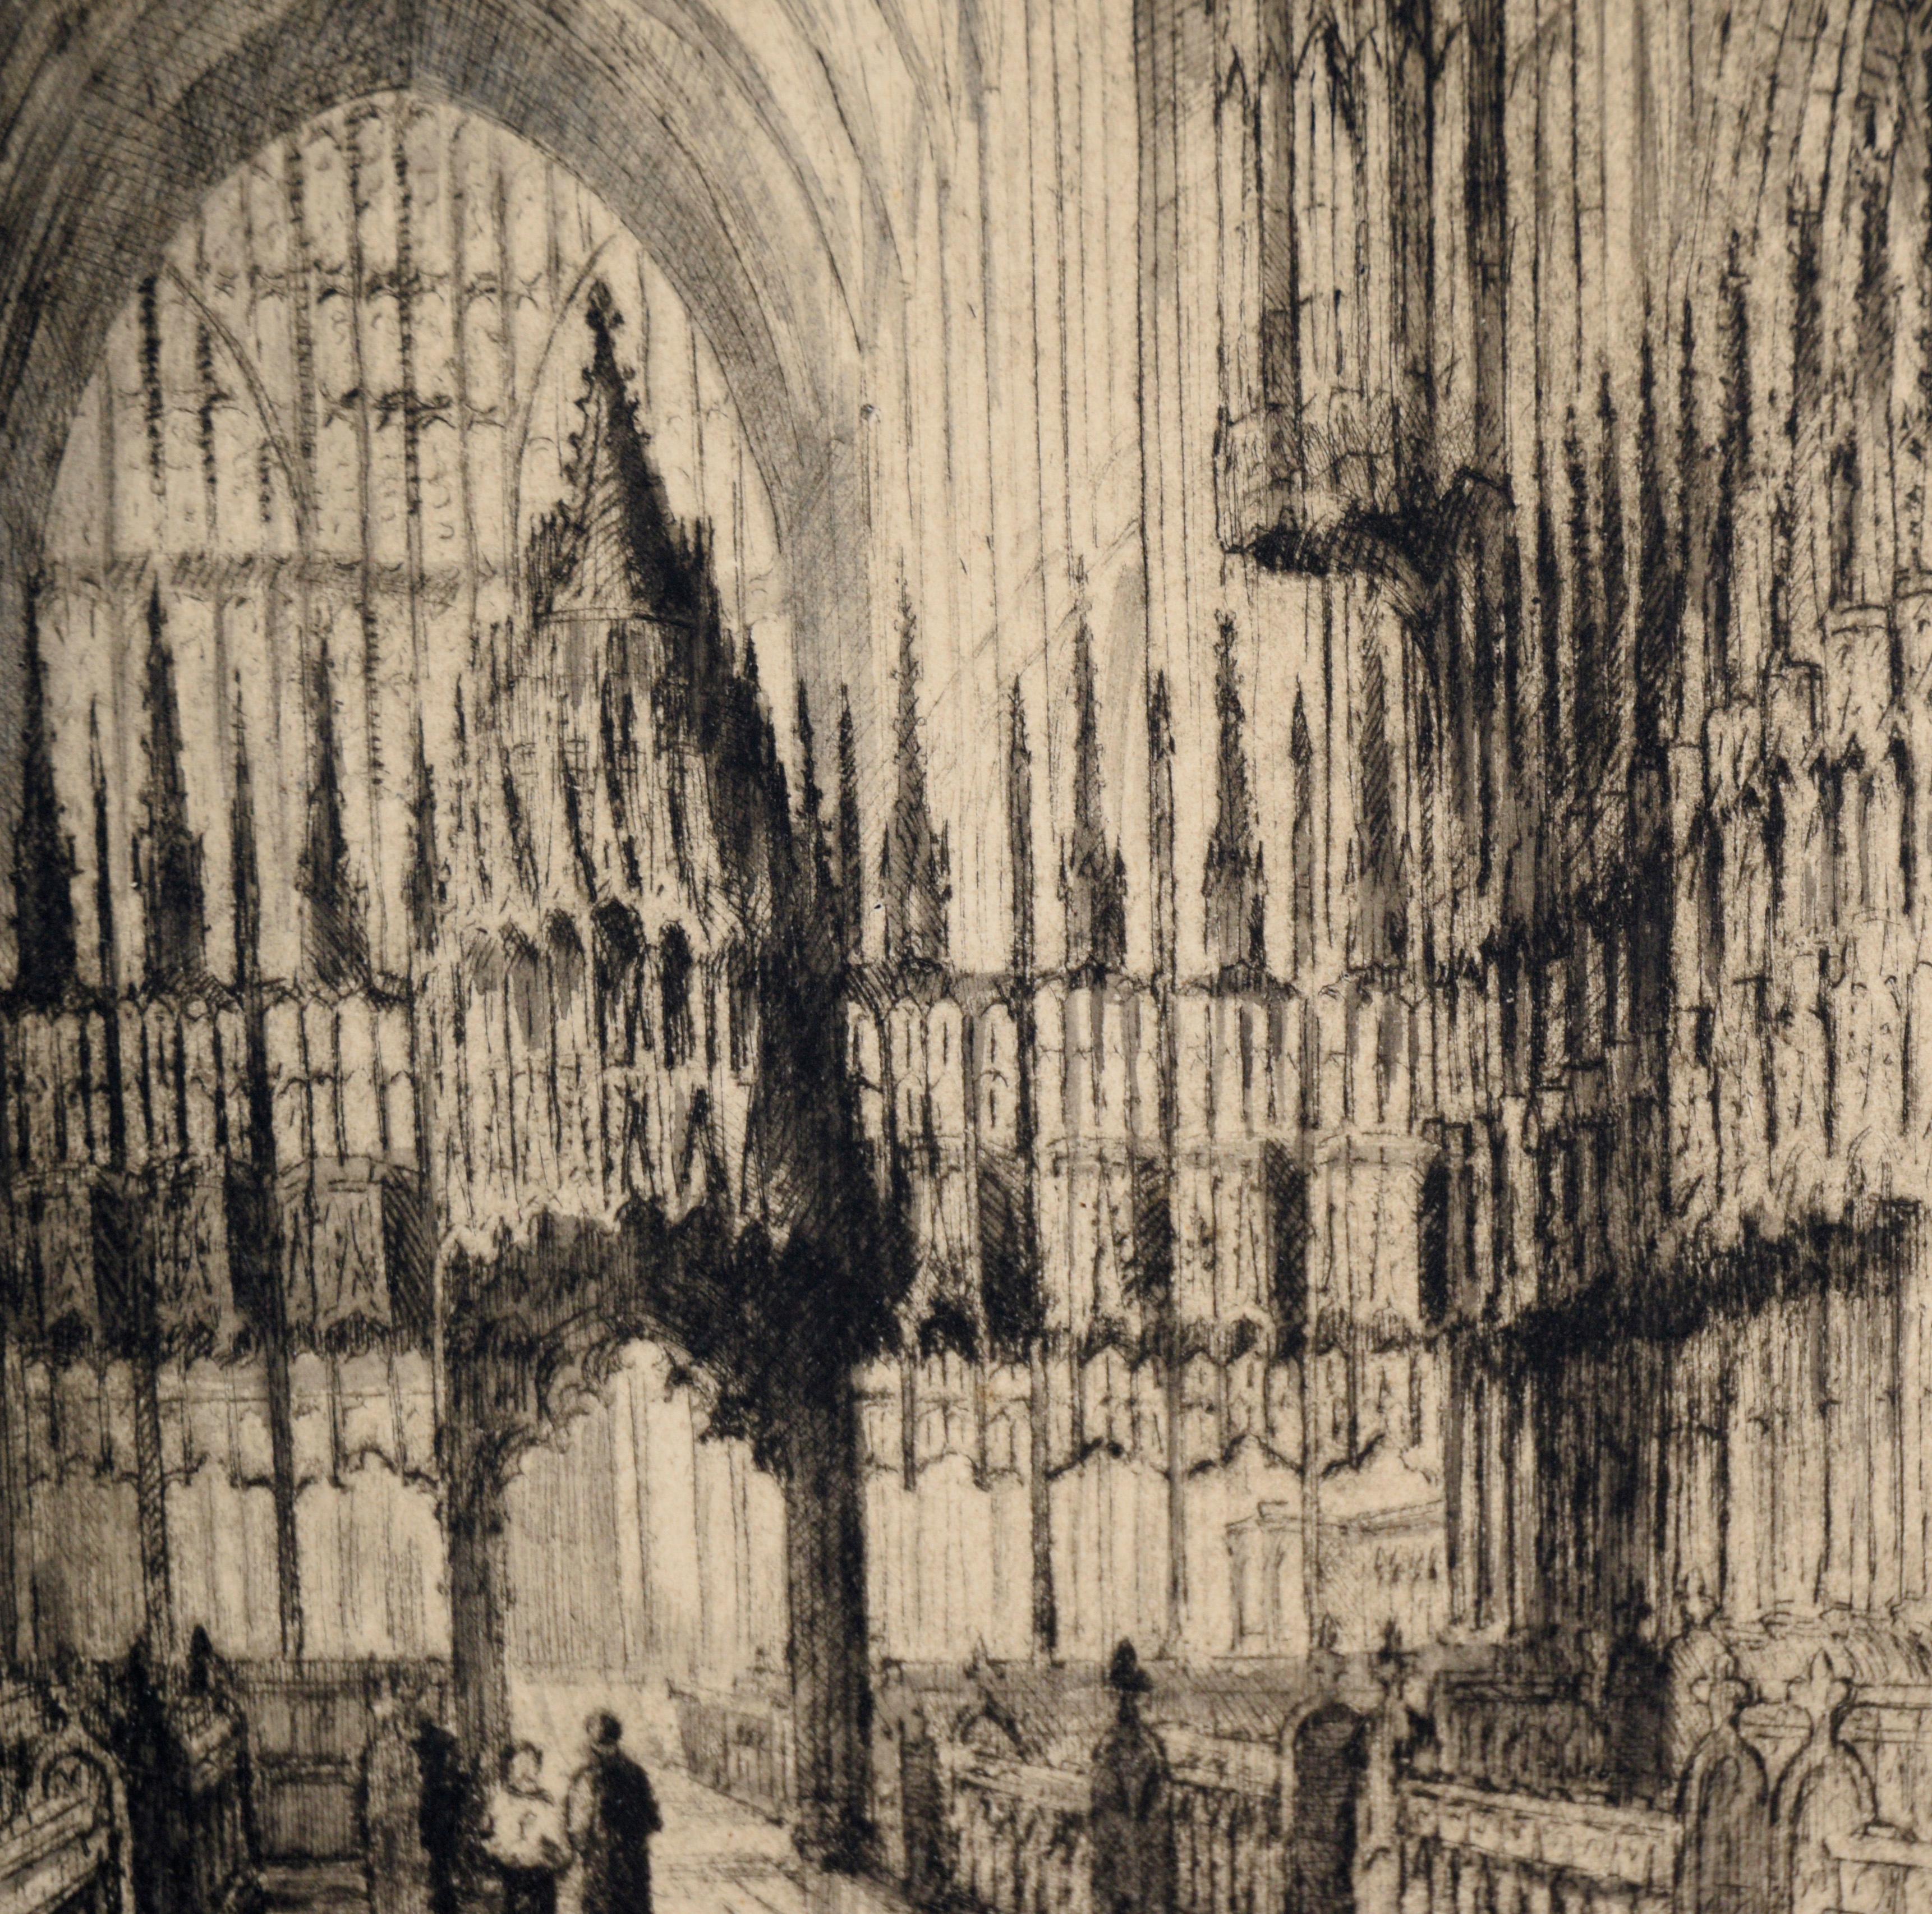 Chester Cathedral - Drypoint Etching in Ink on Paper

Dramatic drypoint etching by J. Alphege Brewer (British, 1881-1946). This composition shows the interior of Chester Cathedral in Brewer's characteristic style - highly detailed and with strong